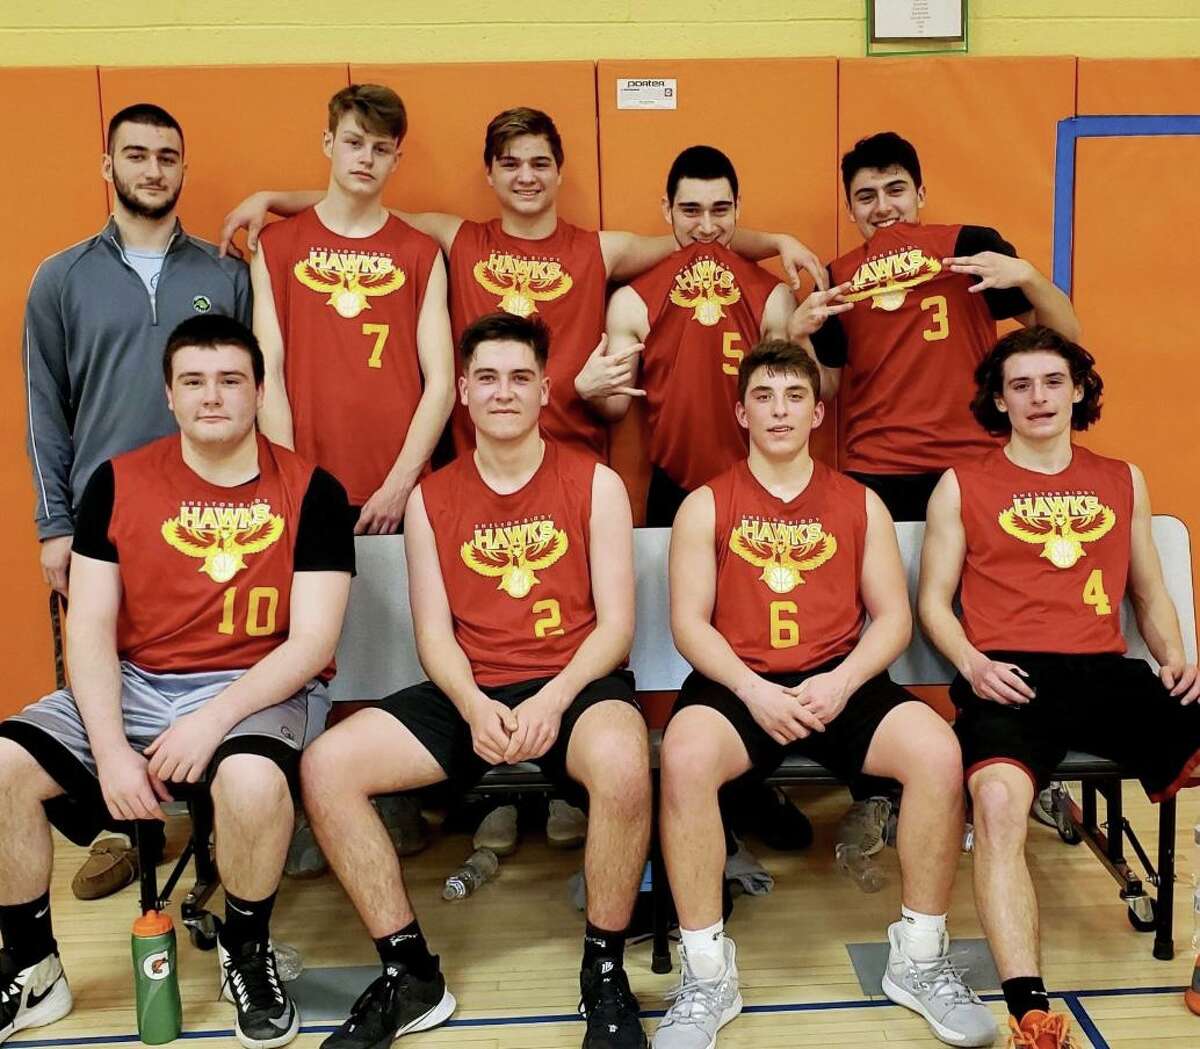 The Hawks won The Senior Cousy basketball championship. Coached by Luke Riccio, who also won a championship in his years playing, the Hawks were led by Michael Wilson, Kyle St. Pierre, Jared Sedlock, and Billy Zaccagnini; (second row) coach Riccio, Conner McGuire, Tim Santos, John Riccio and Chris Zarro.